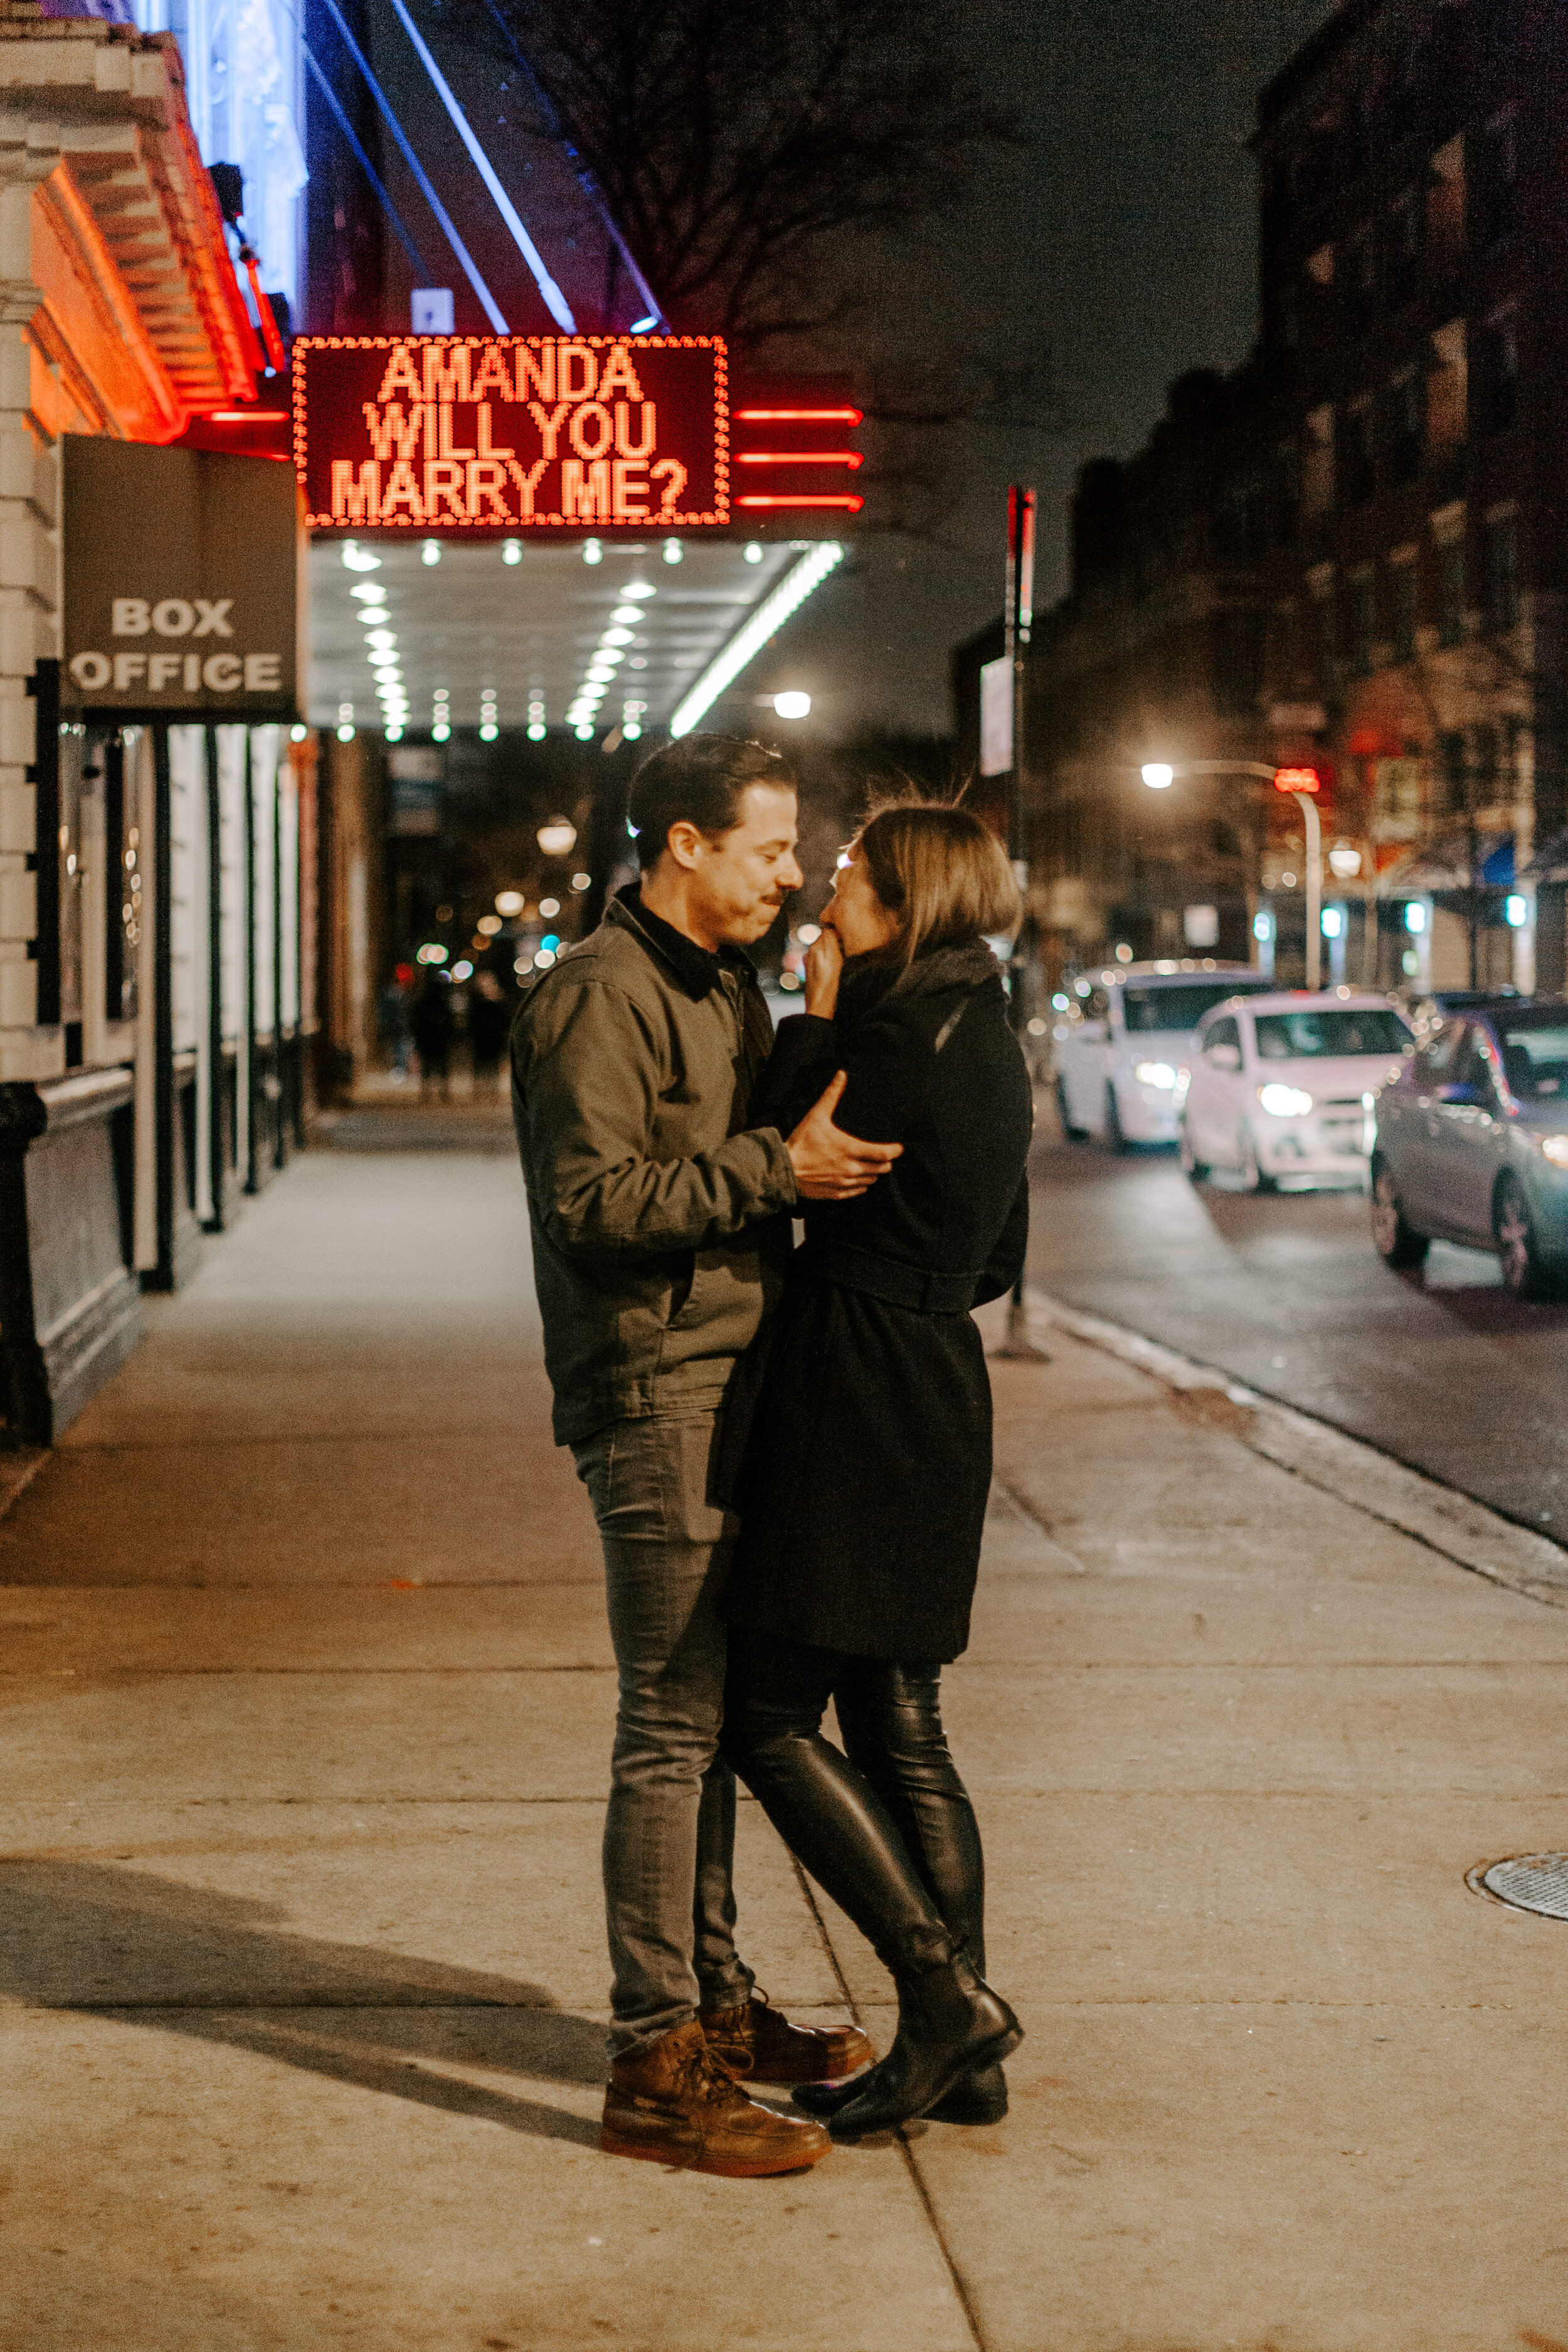  Chicago surprise proposal, man holds his girlfriend as she reacts emotionally in front of theater marquee reading Amanda Will You Marry Me? Chicago engagement photographer, Lucy B. Photography 